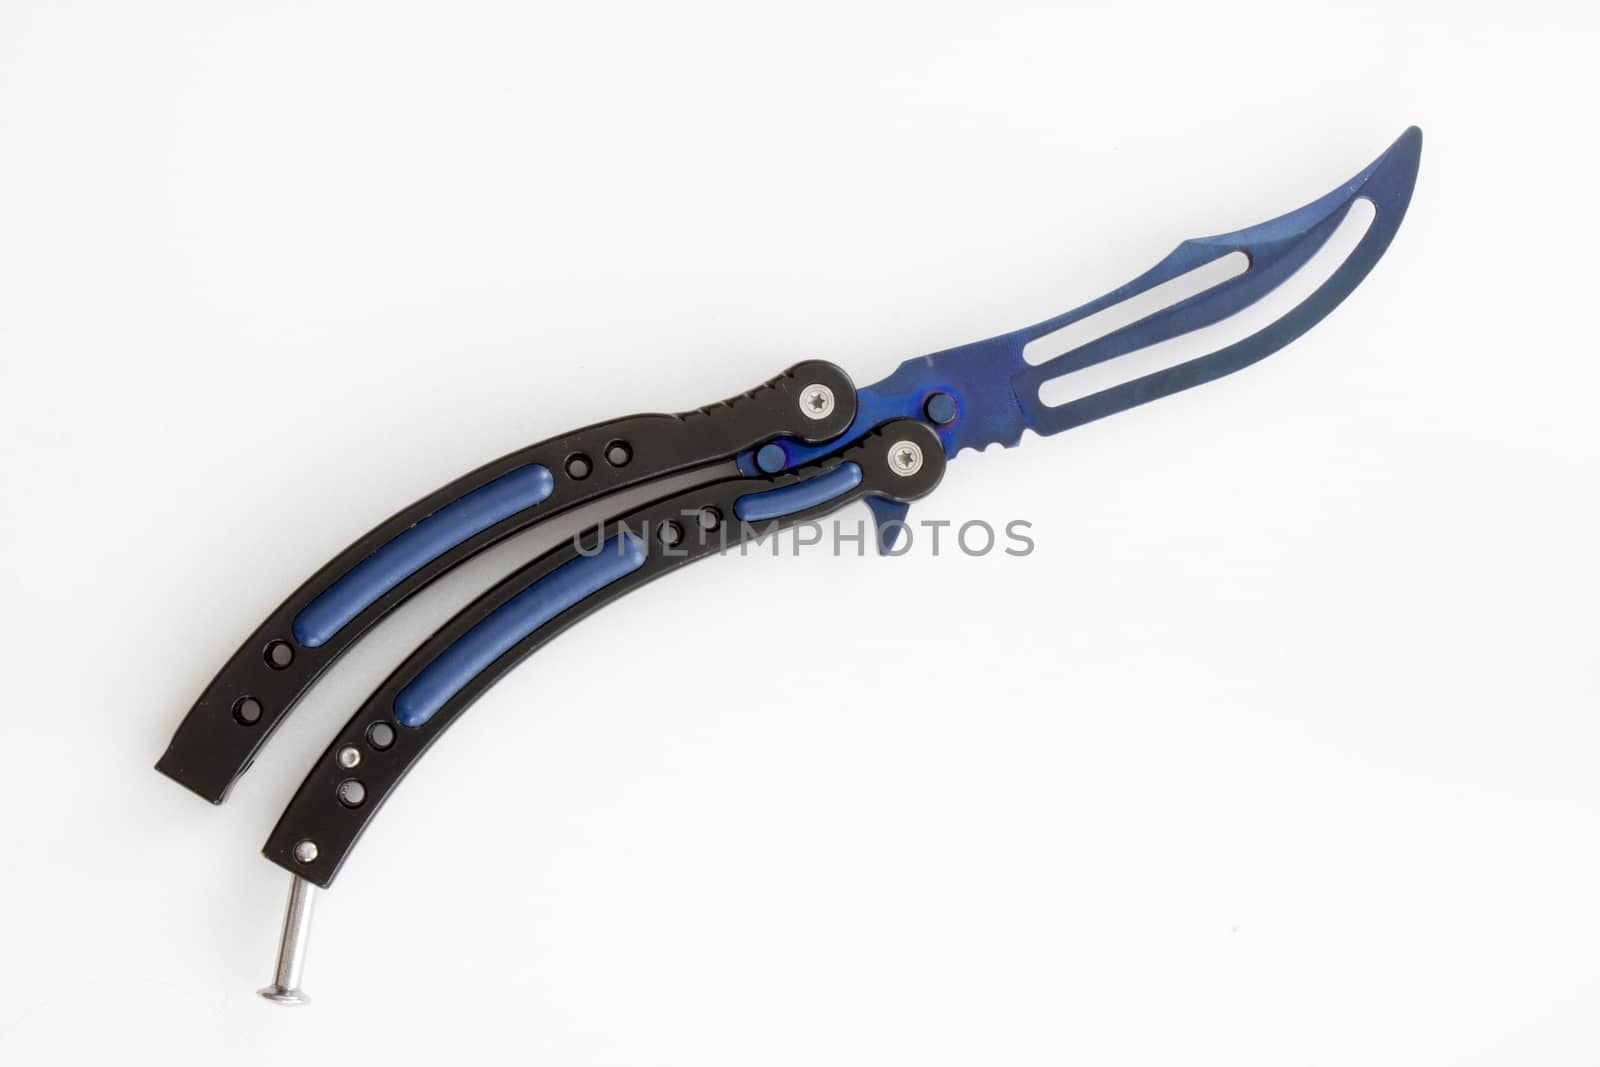 Blue steel butterfly knife opened and ready